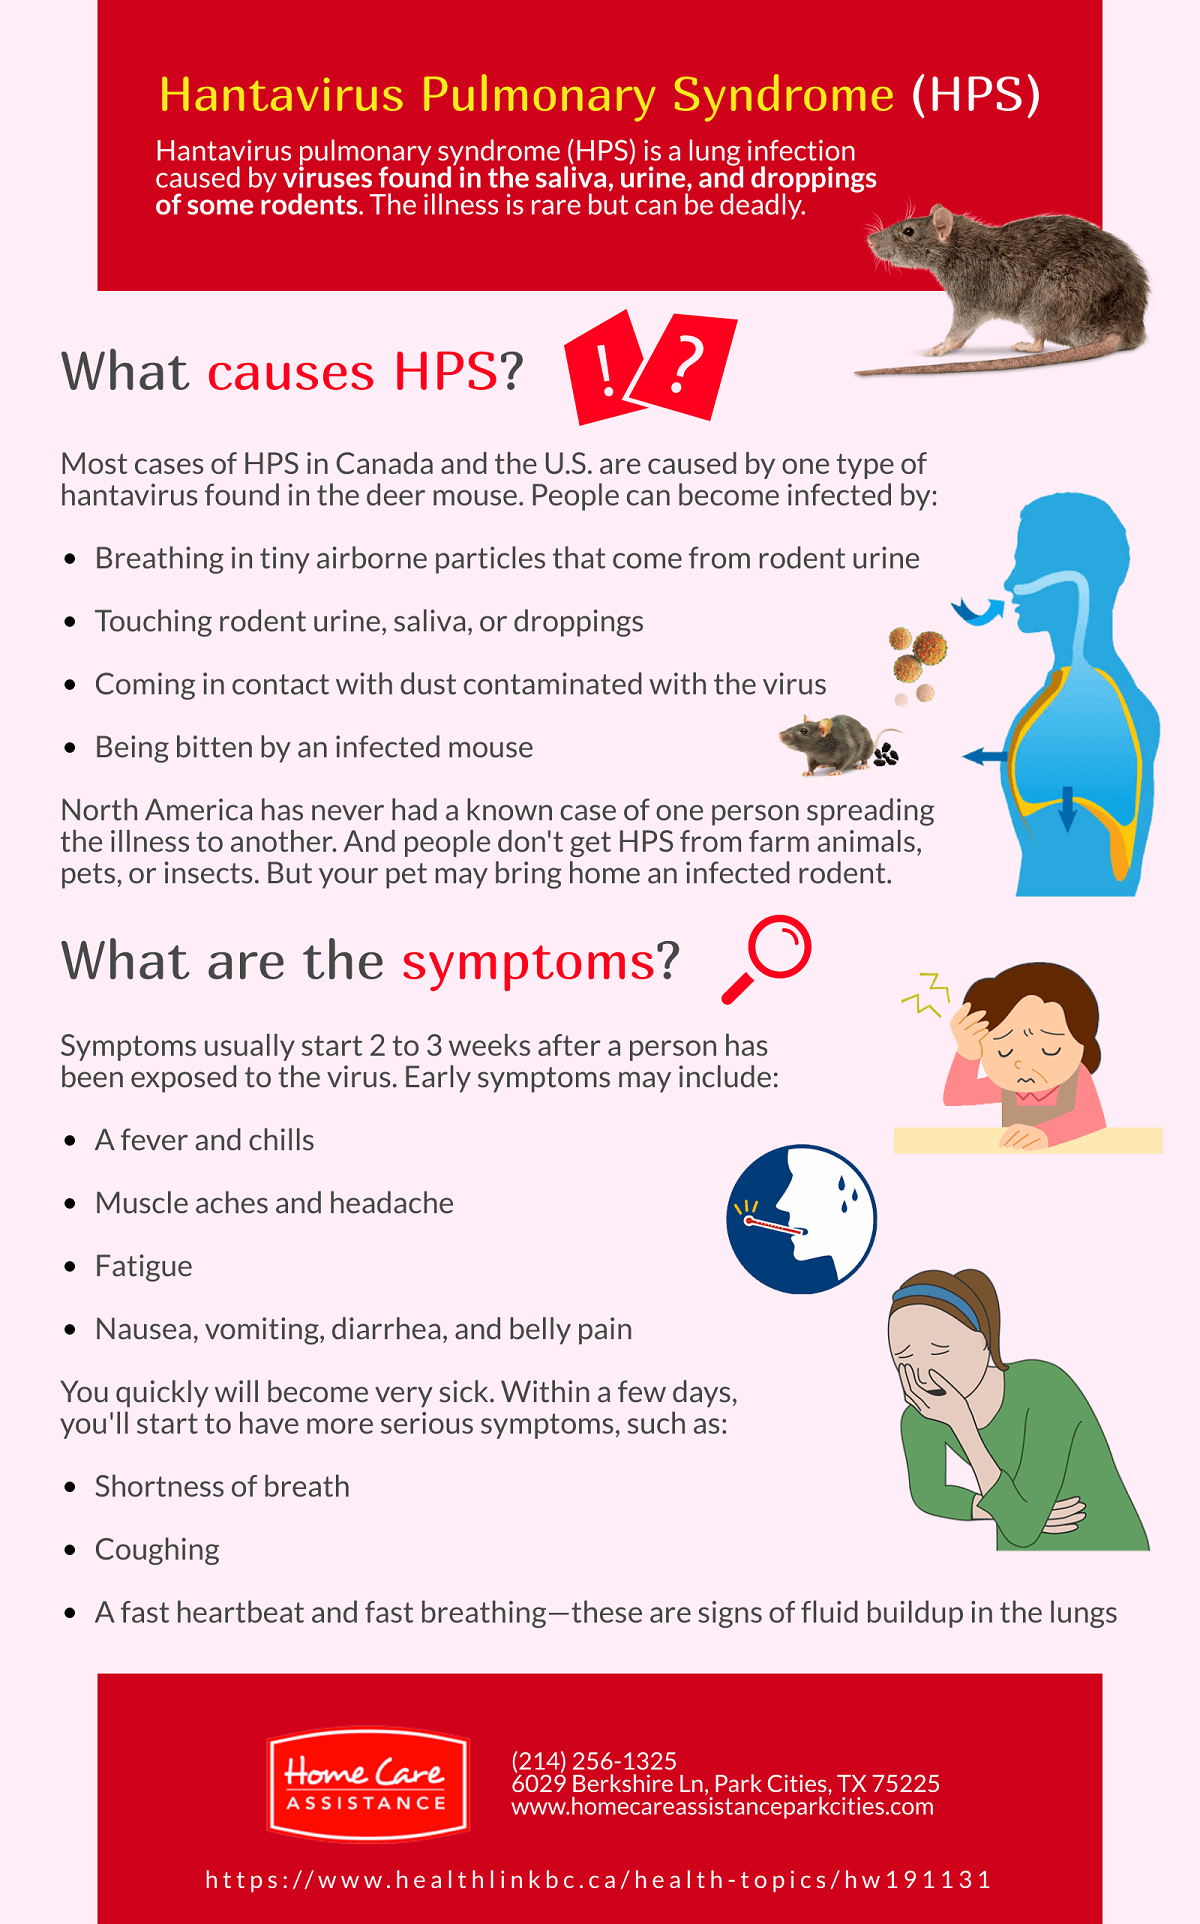 All About Hantavirus Pulmonary Syndrome [Infographic]